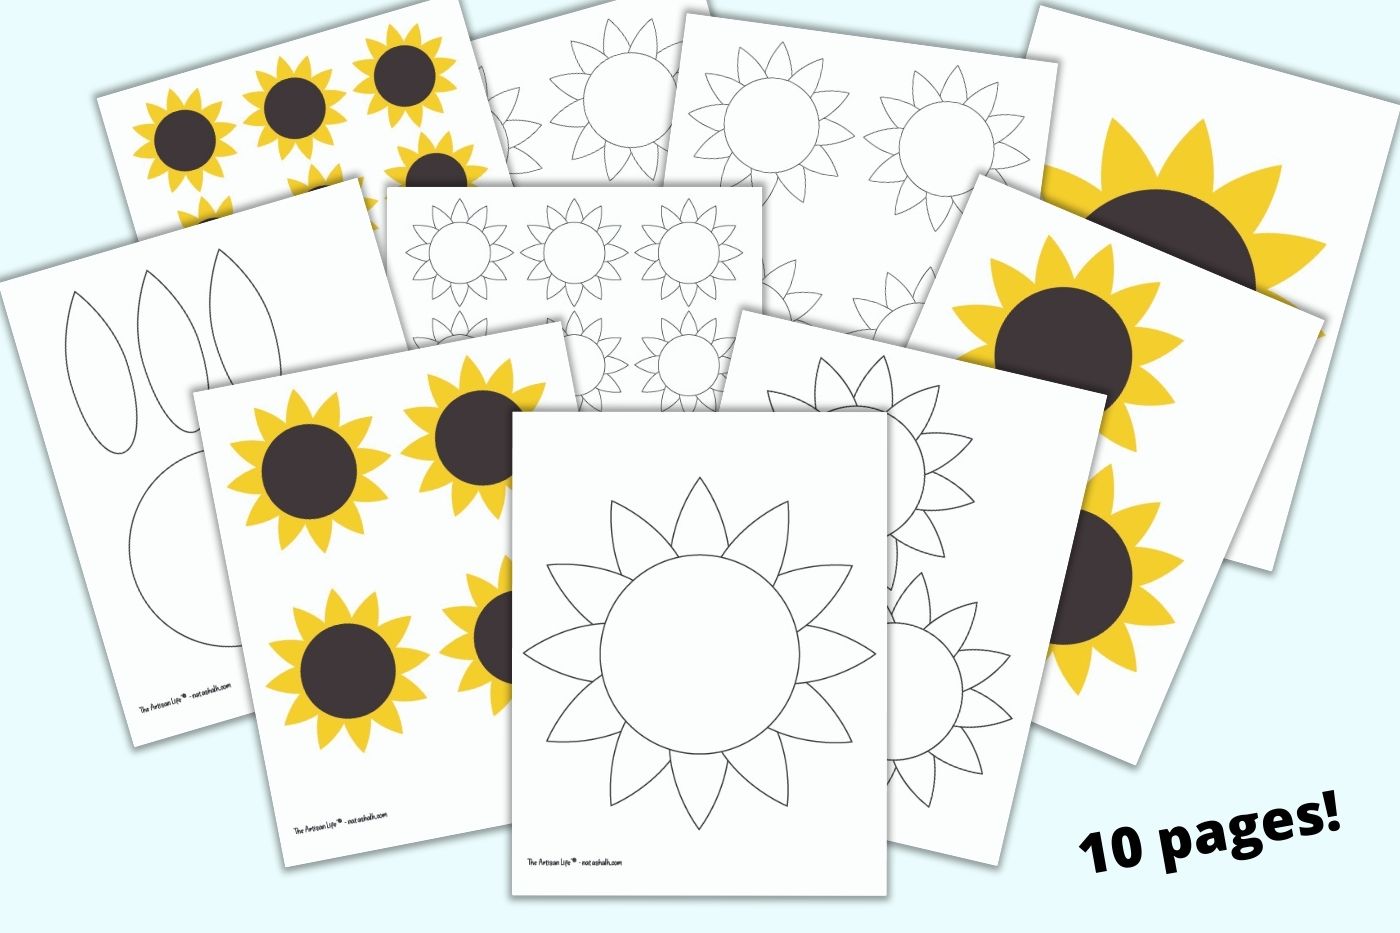 Printable sunflower templates and patterns â the artisan life